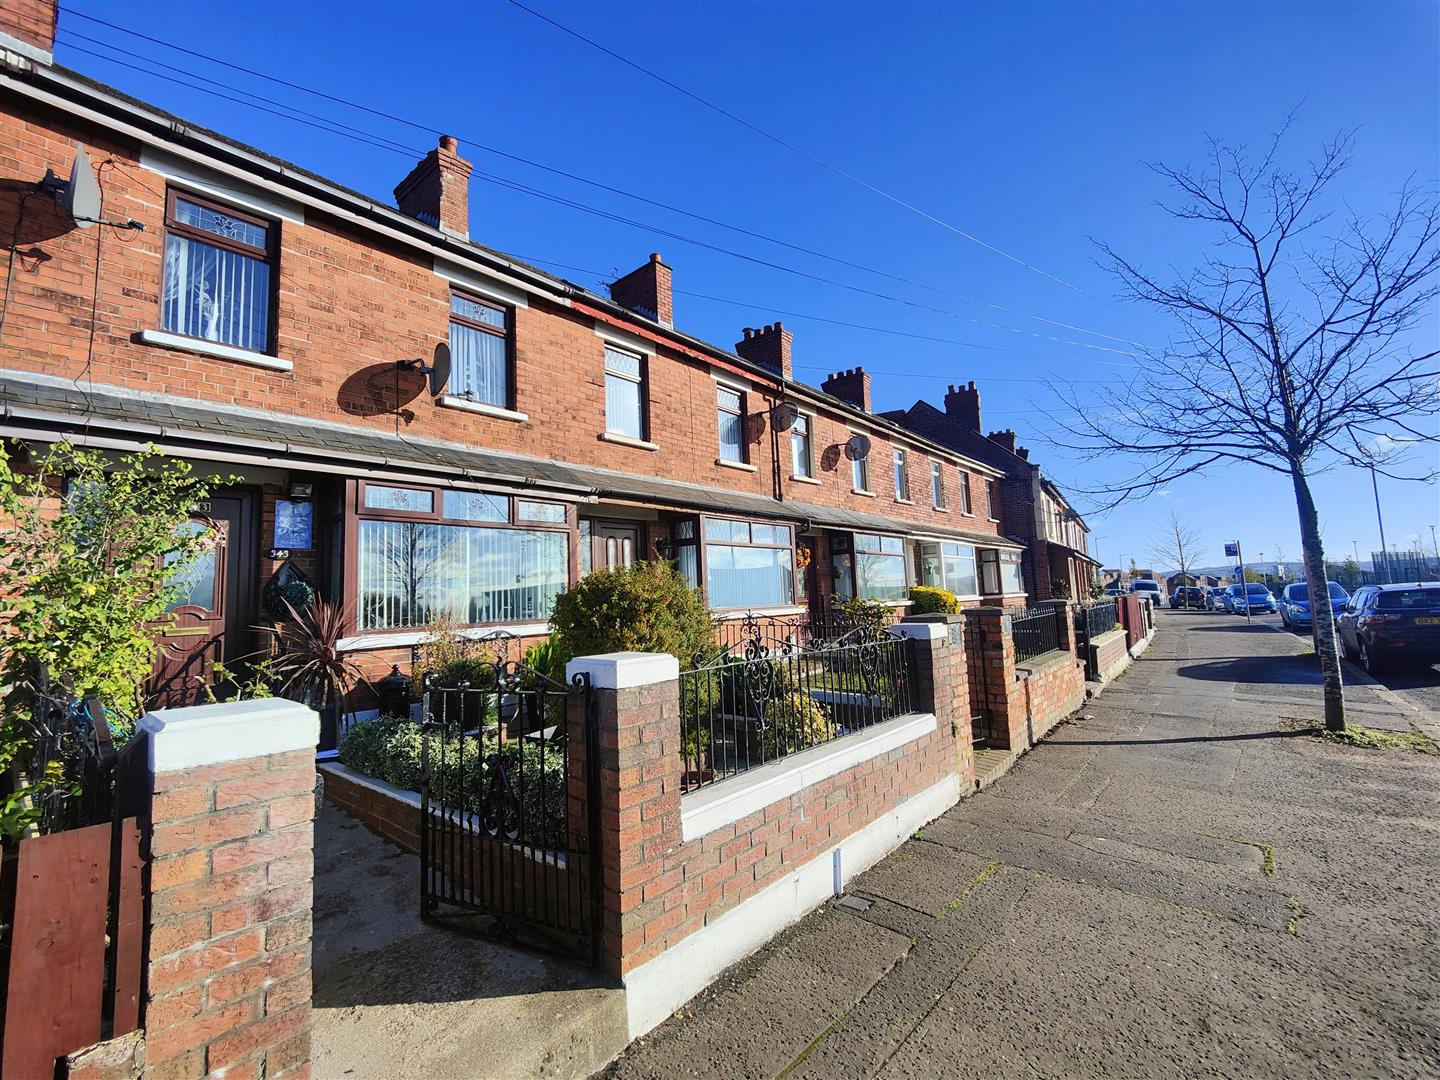 343 Oldpark Road, Belfast for sale with UPS